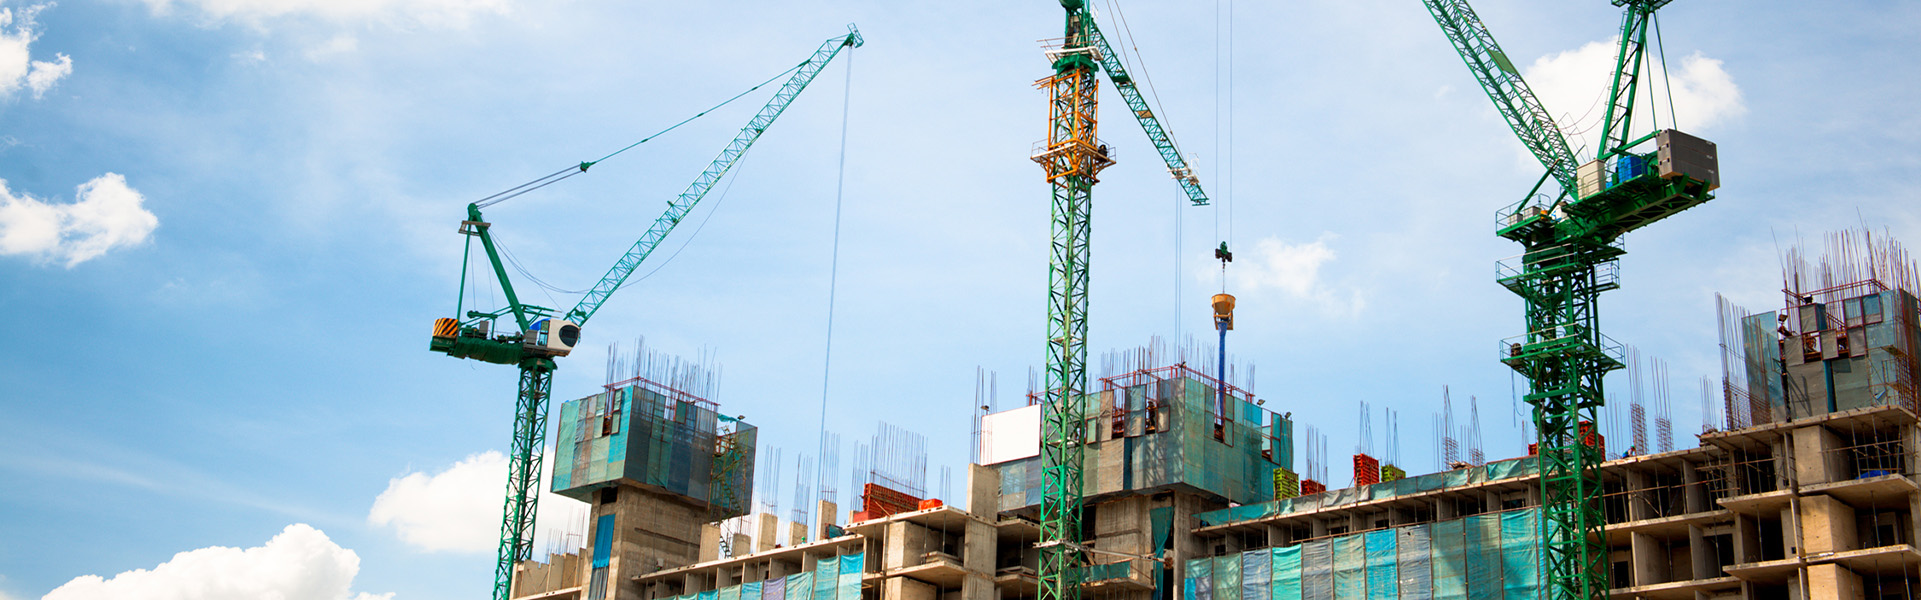 Al in construction: Do your contracts mitigate the risks?